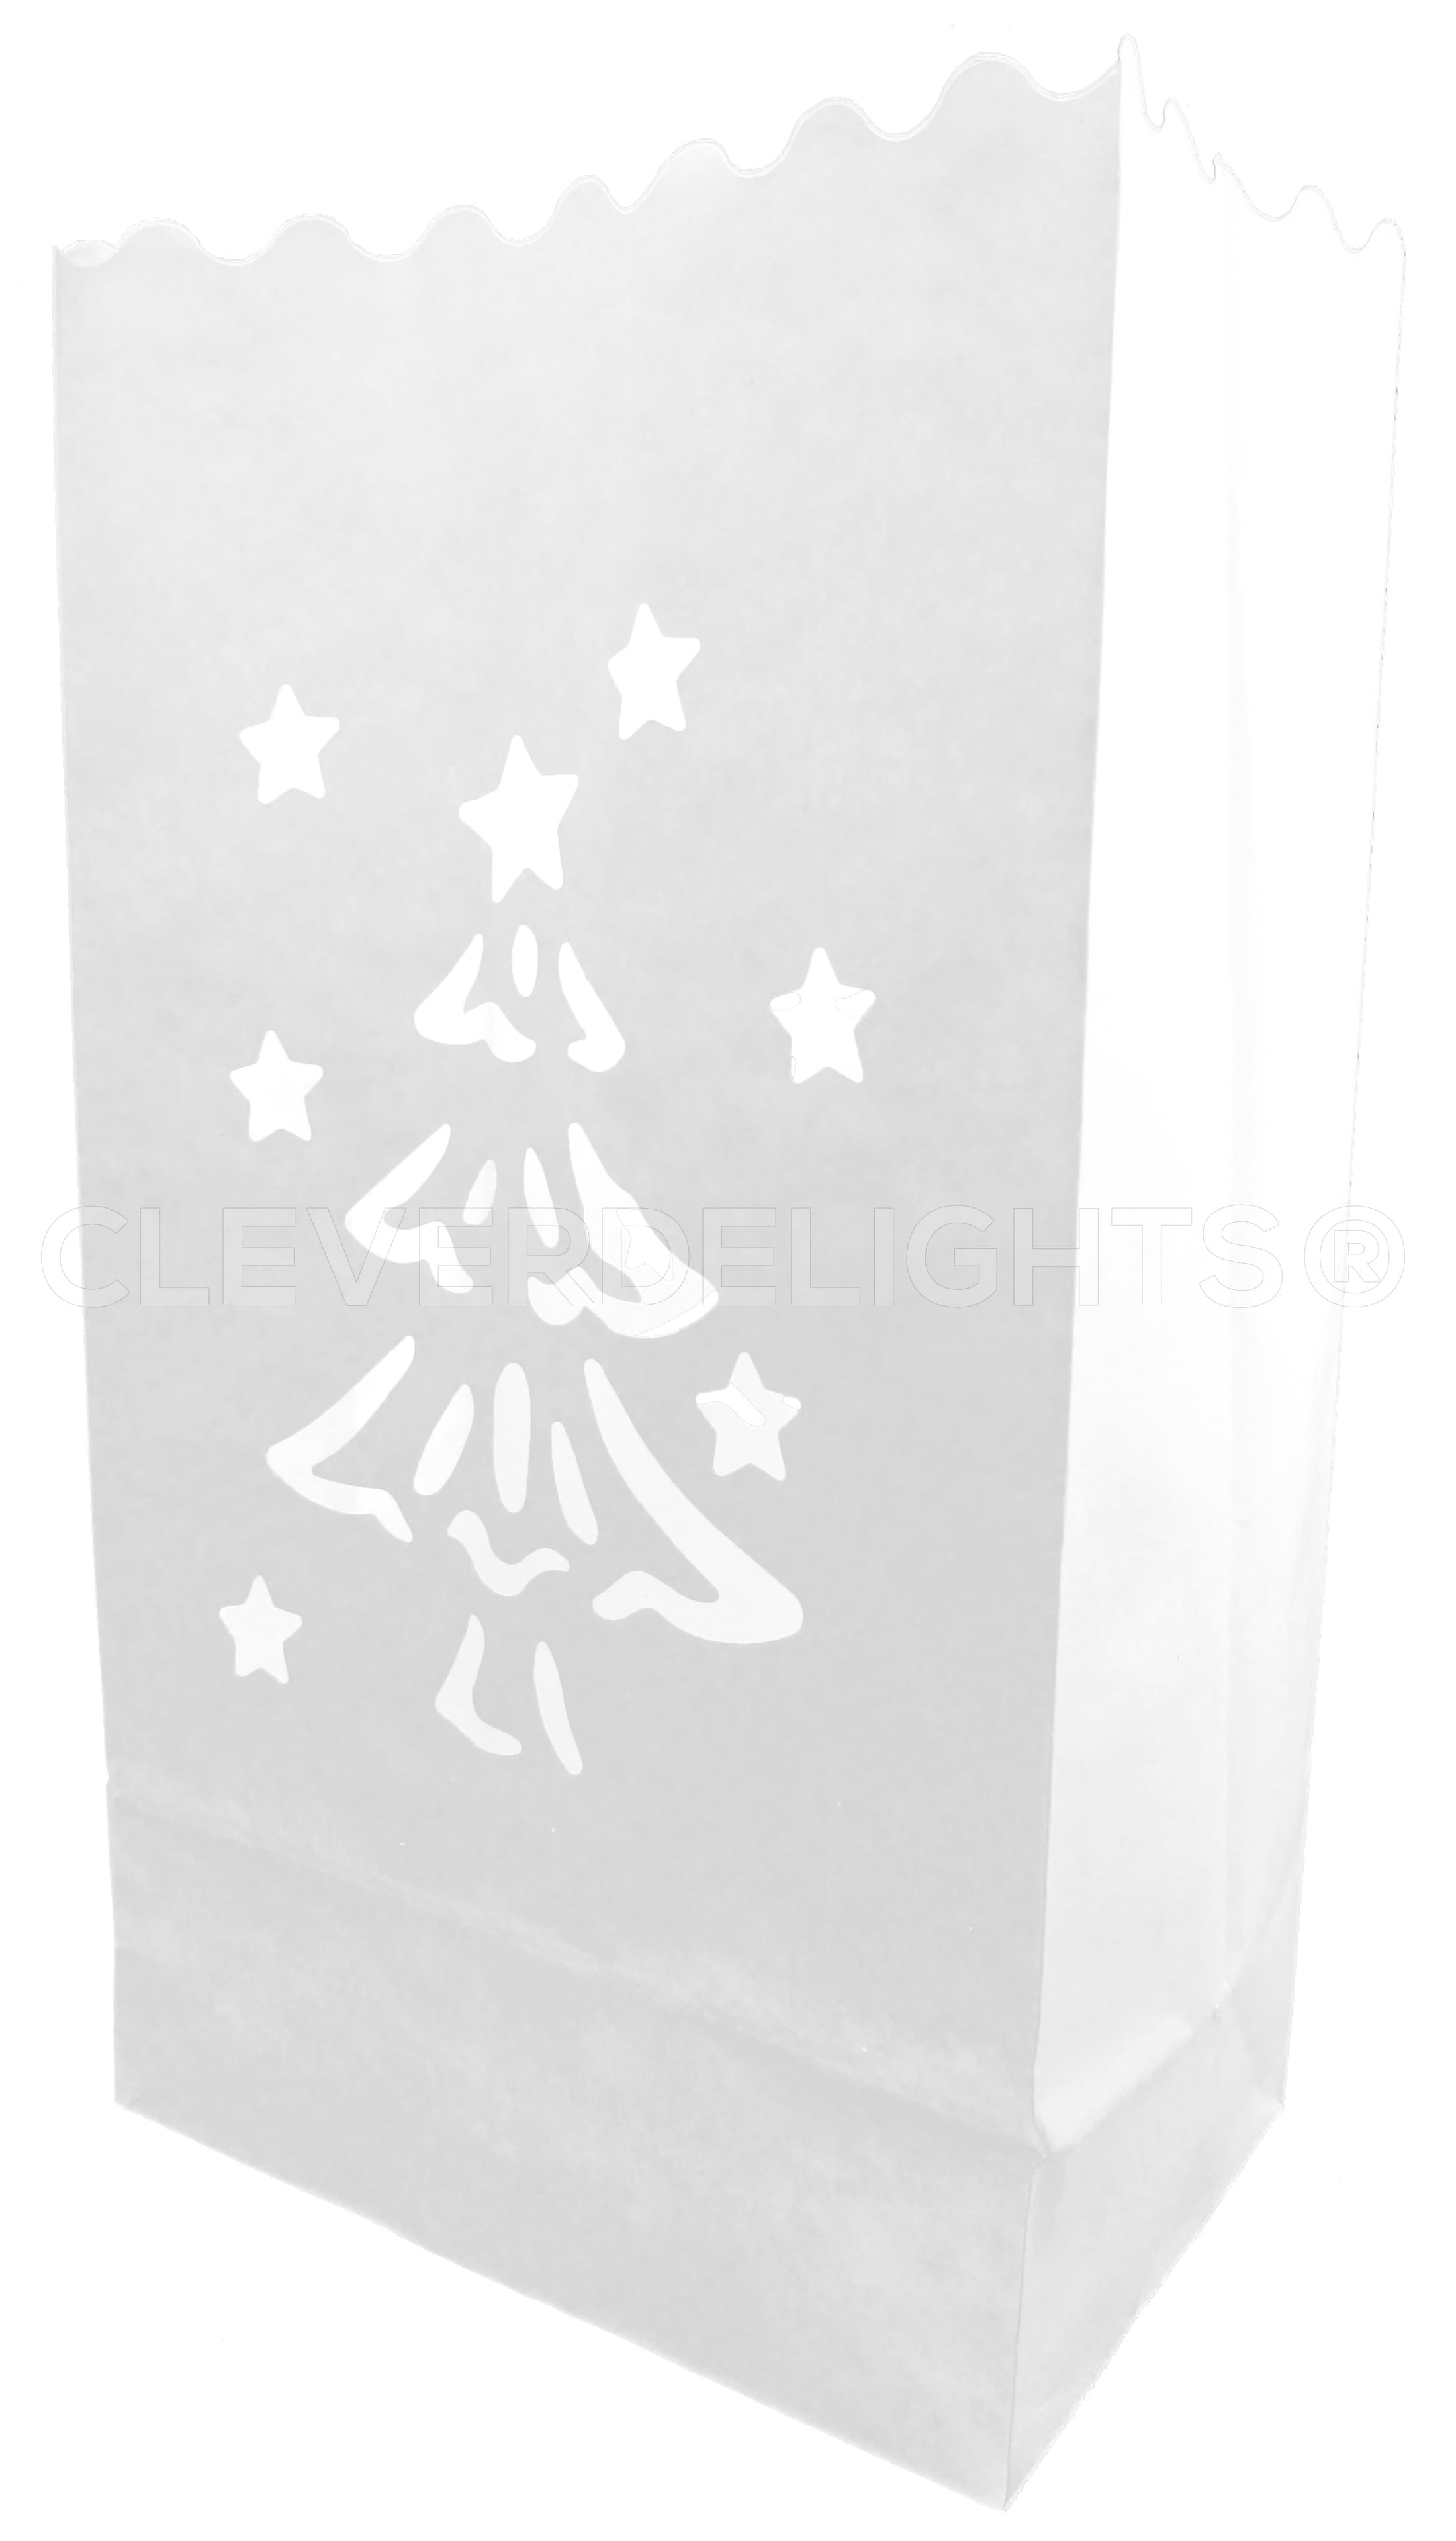 CleverDelights cleverdelights white sunburst luminary bags - 10 count -  wedding party christmas holiday luminaria